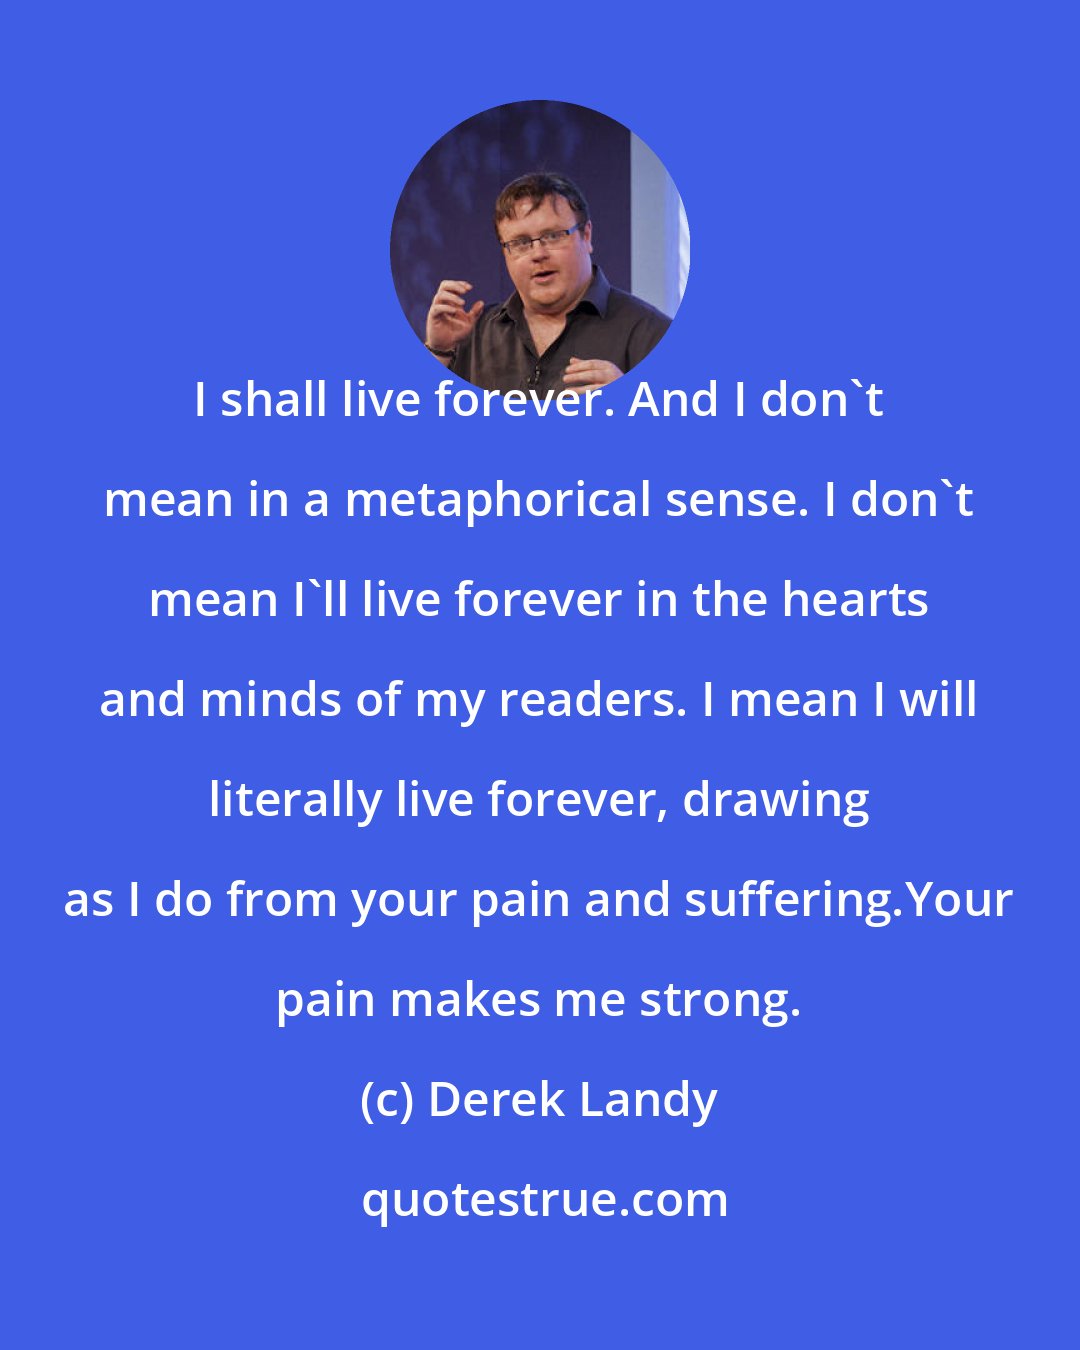 Derek Landy: I shall live forever. And I don't mean in a metaphorical sense. I don't mean I'll live forever in the hearts and minds of my readers. I mean I will literally live forever, drawing as I do from your pain and suffering.Your pain makes me strong.